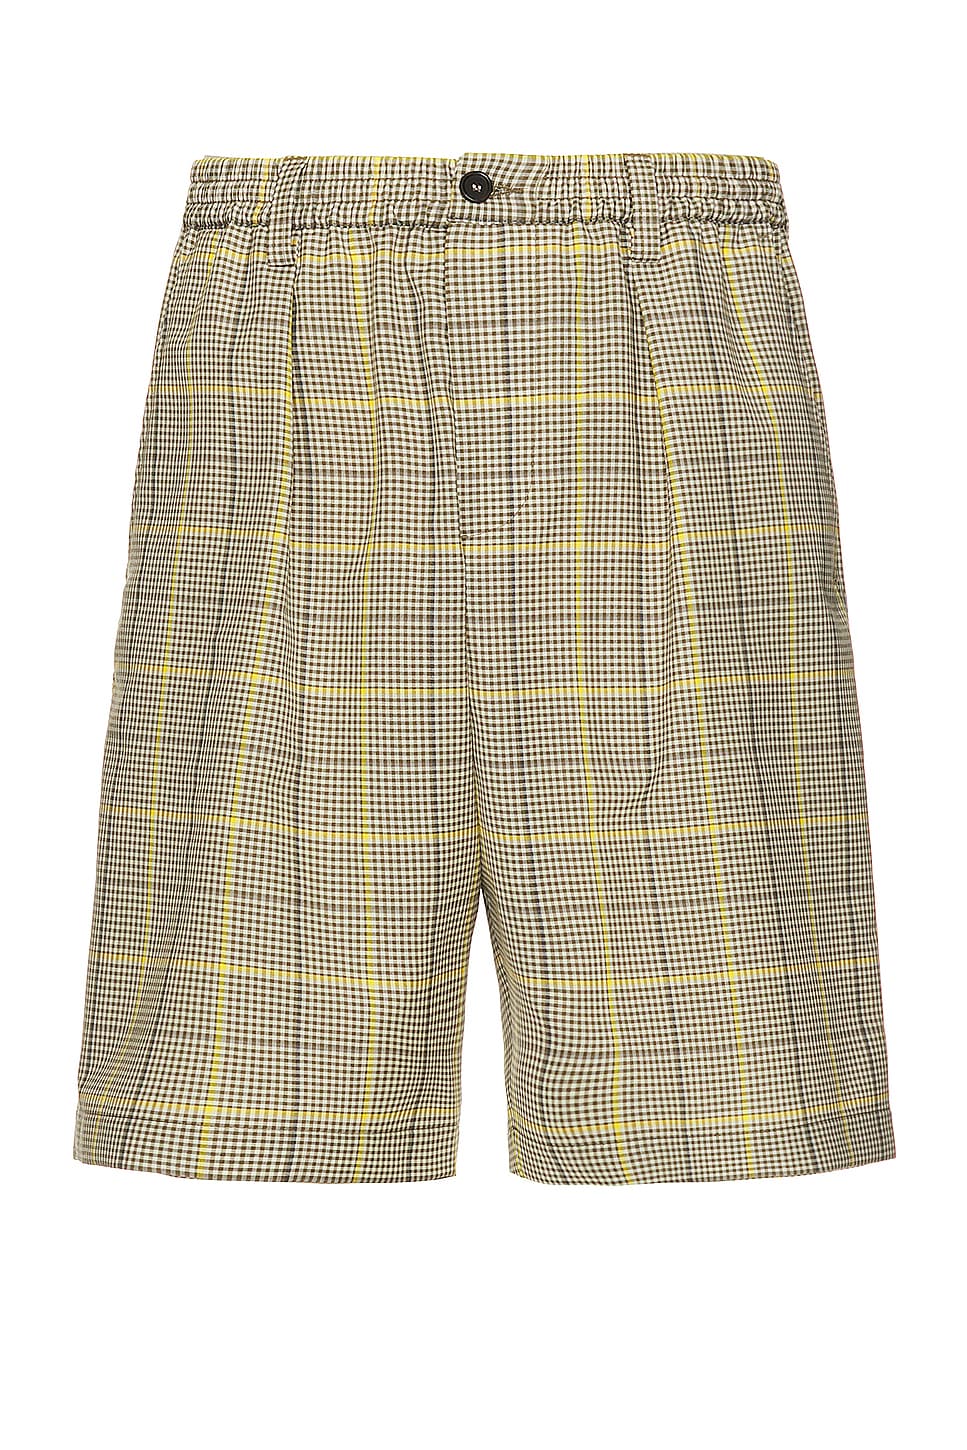 Image 1 of Marni Short in India Yellow